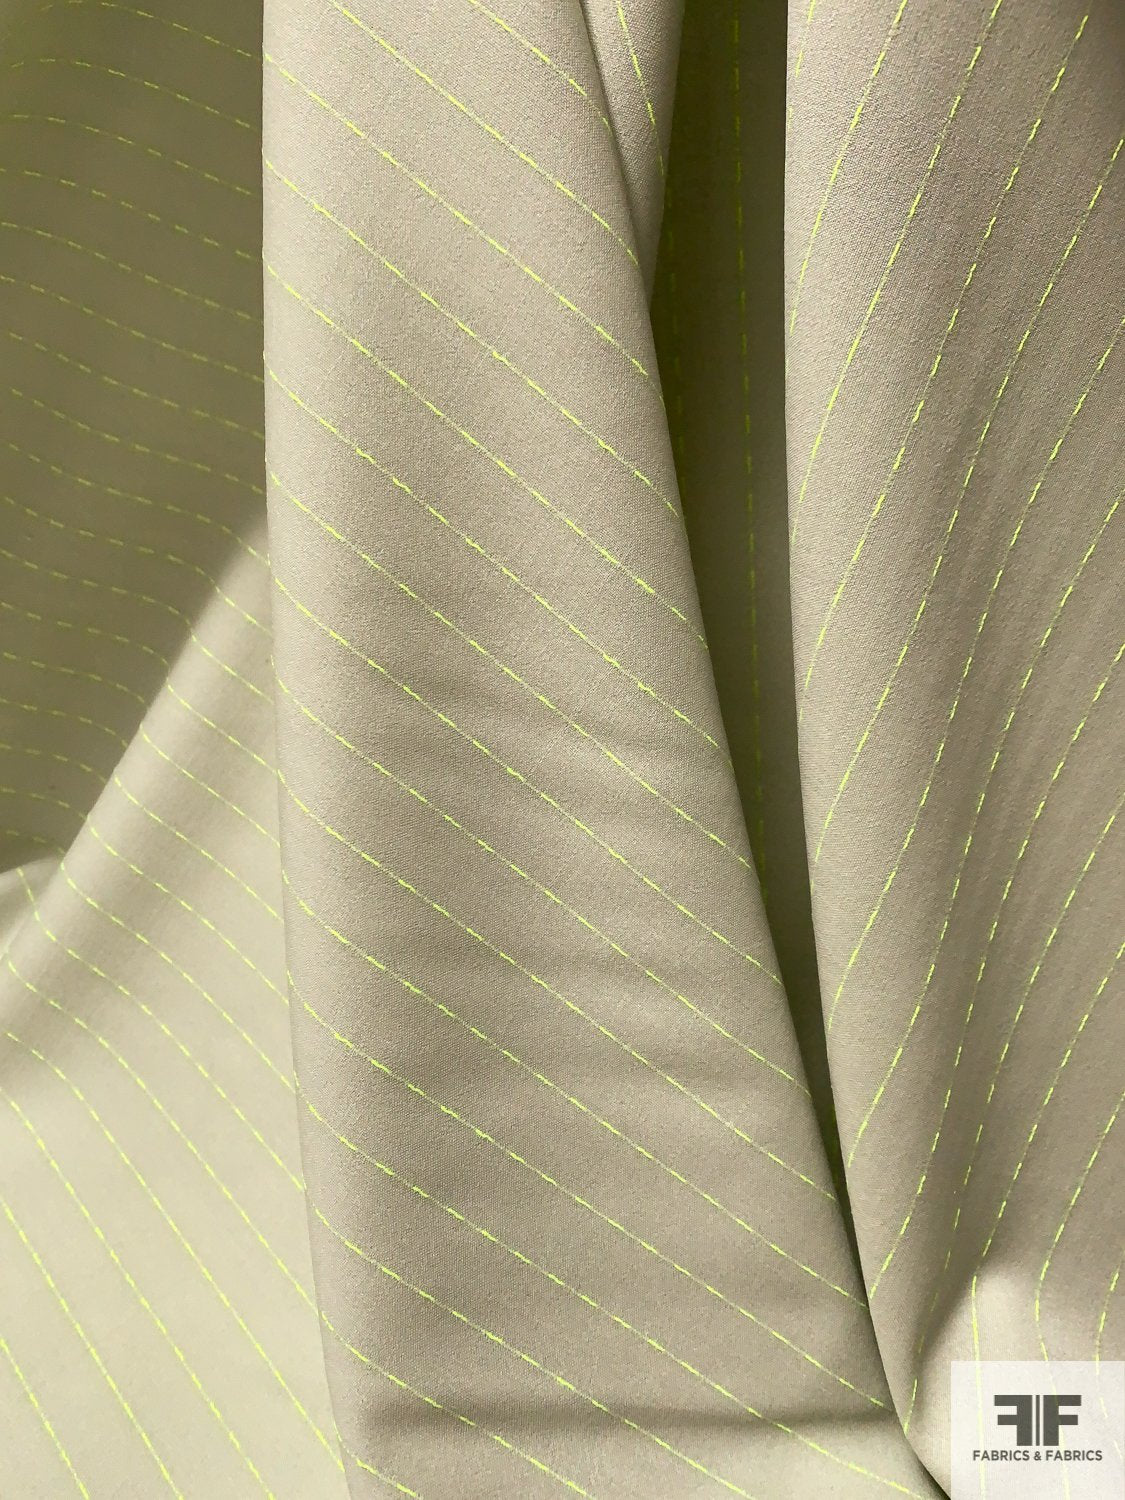 Made in Italy Virgin Wool Blend Suiting with Finely Woven Stripes - Light Sage / Neon Green